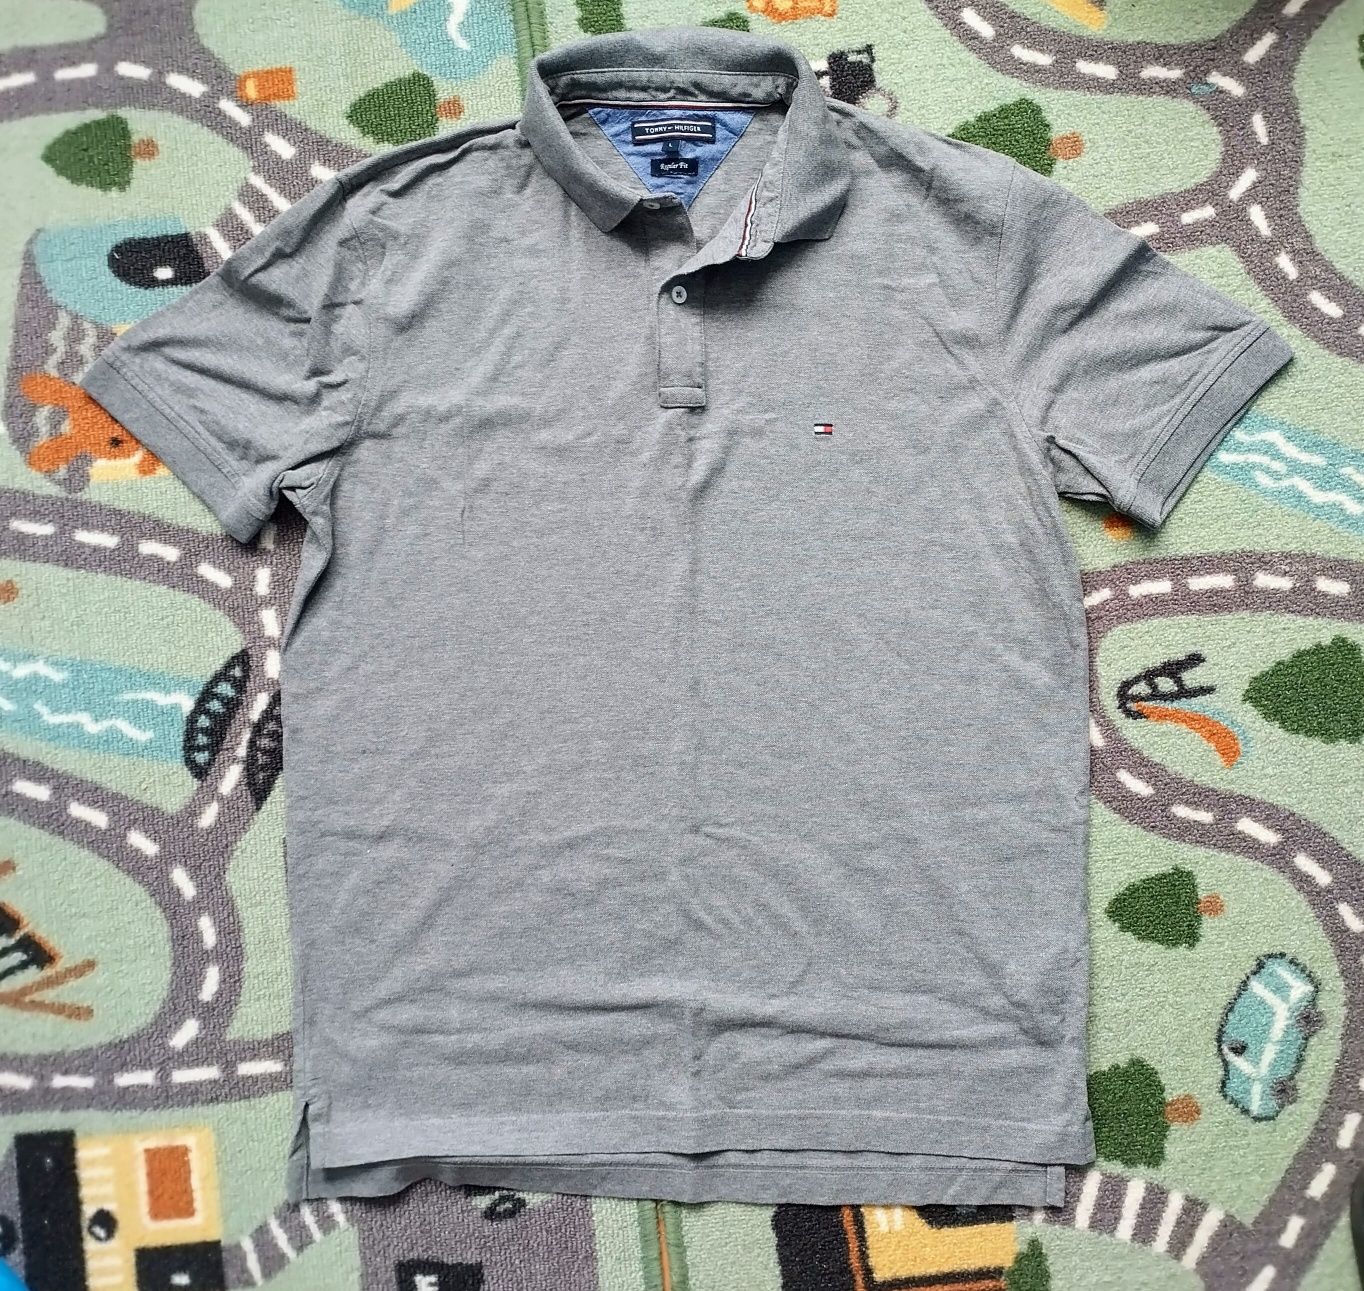 Tricouri polo originale Lacoste Tommy Fred Perry